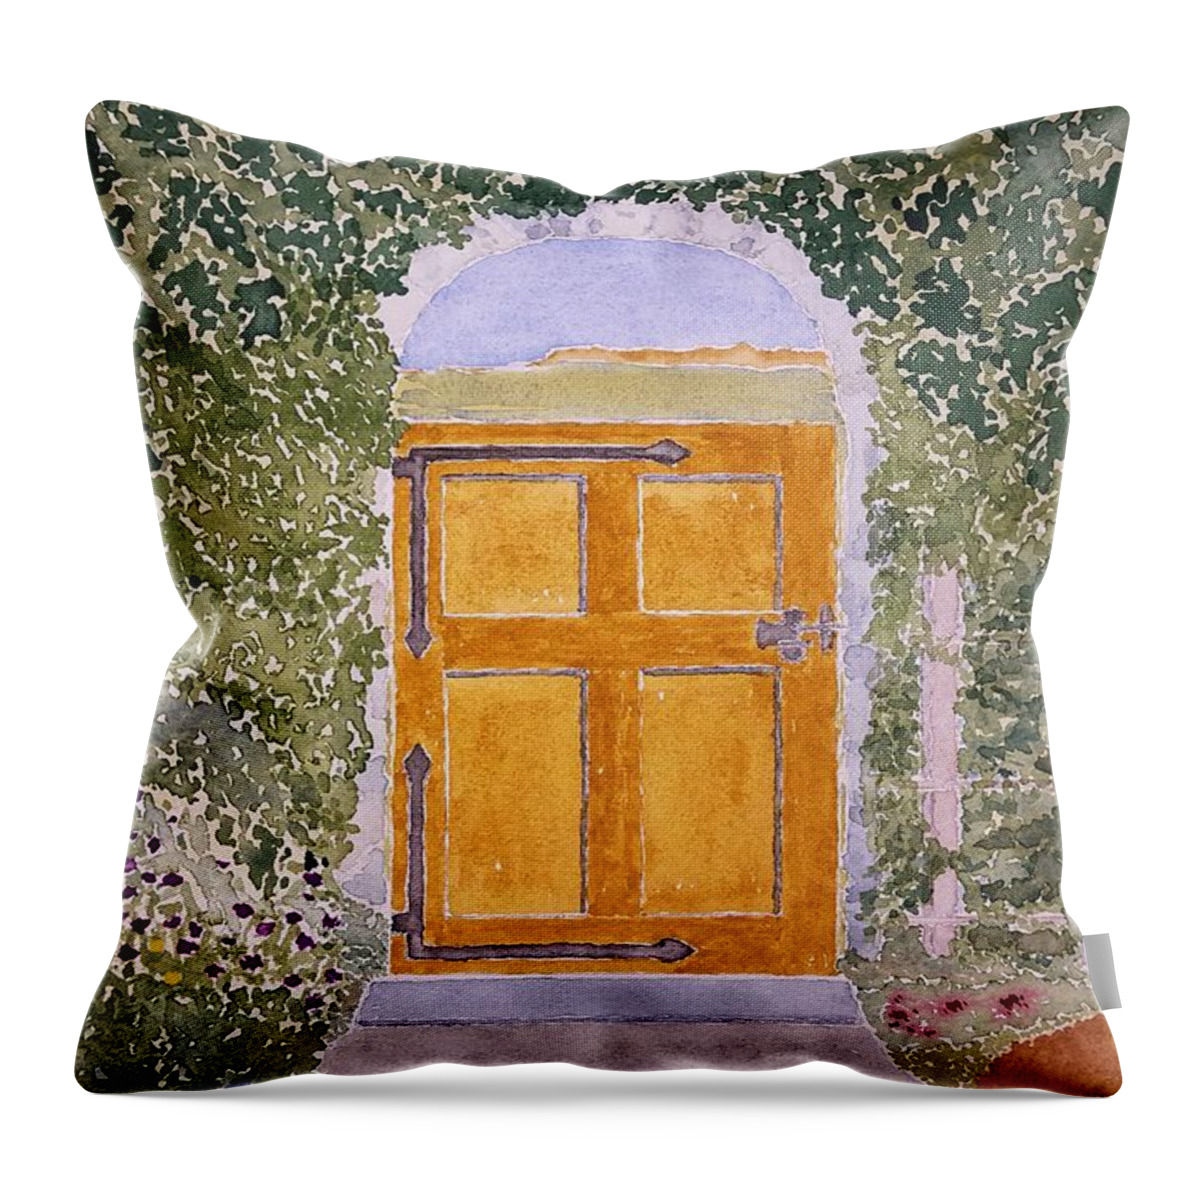 Watercolor Throw Pillow featuring the painting Garden Lore by John Klobucher